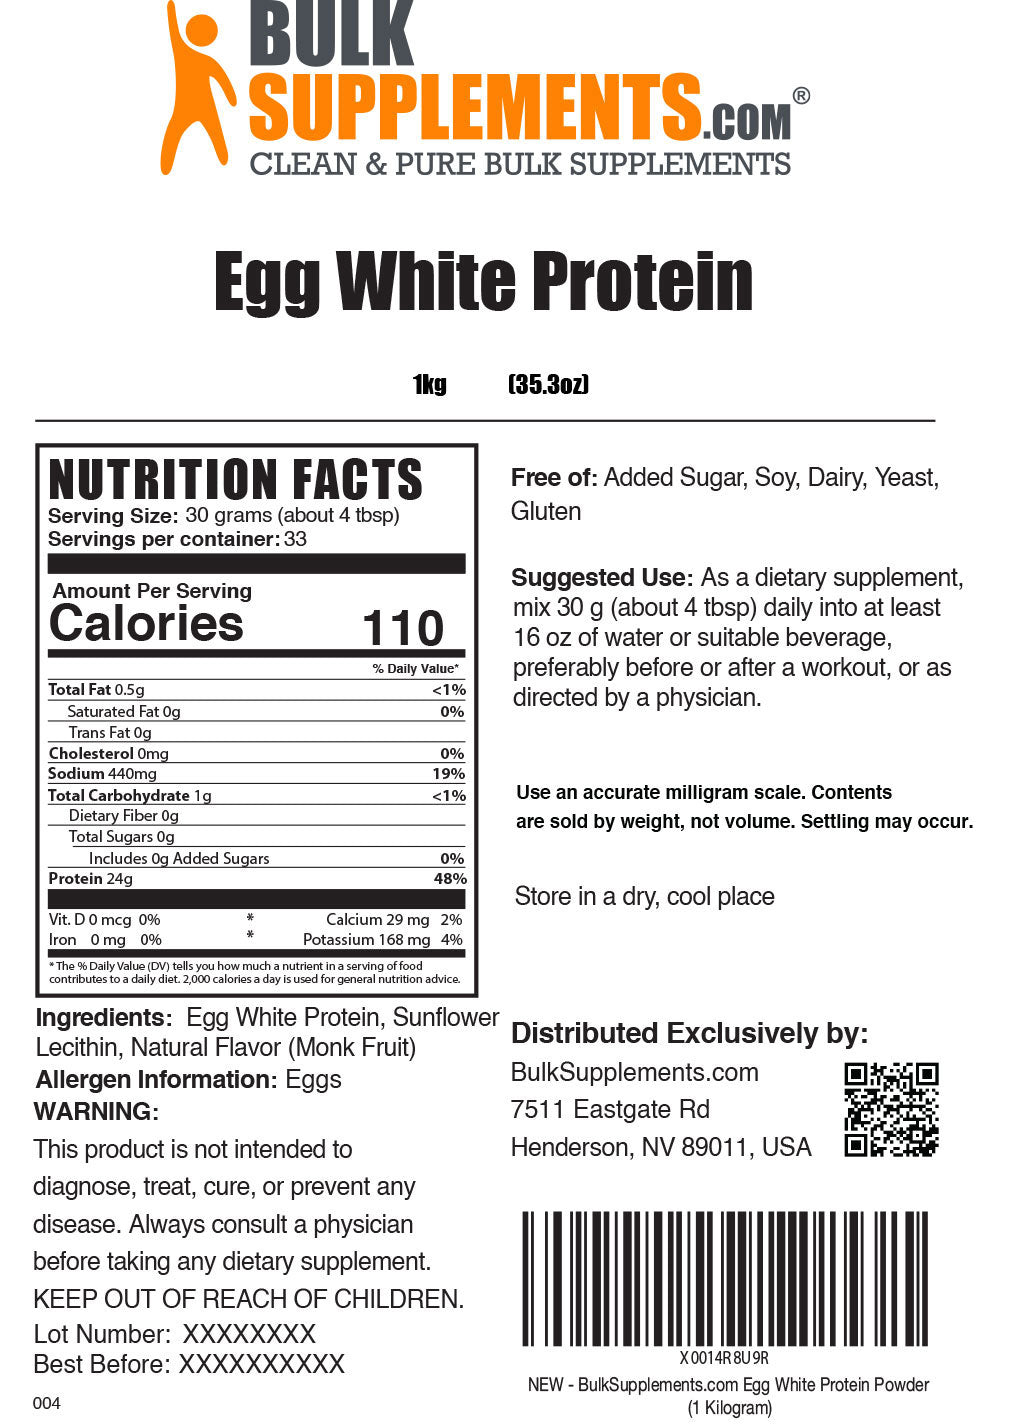 Egg White Protein 1kg Nutrition Facts